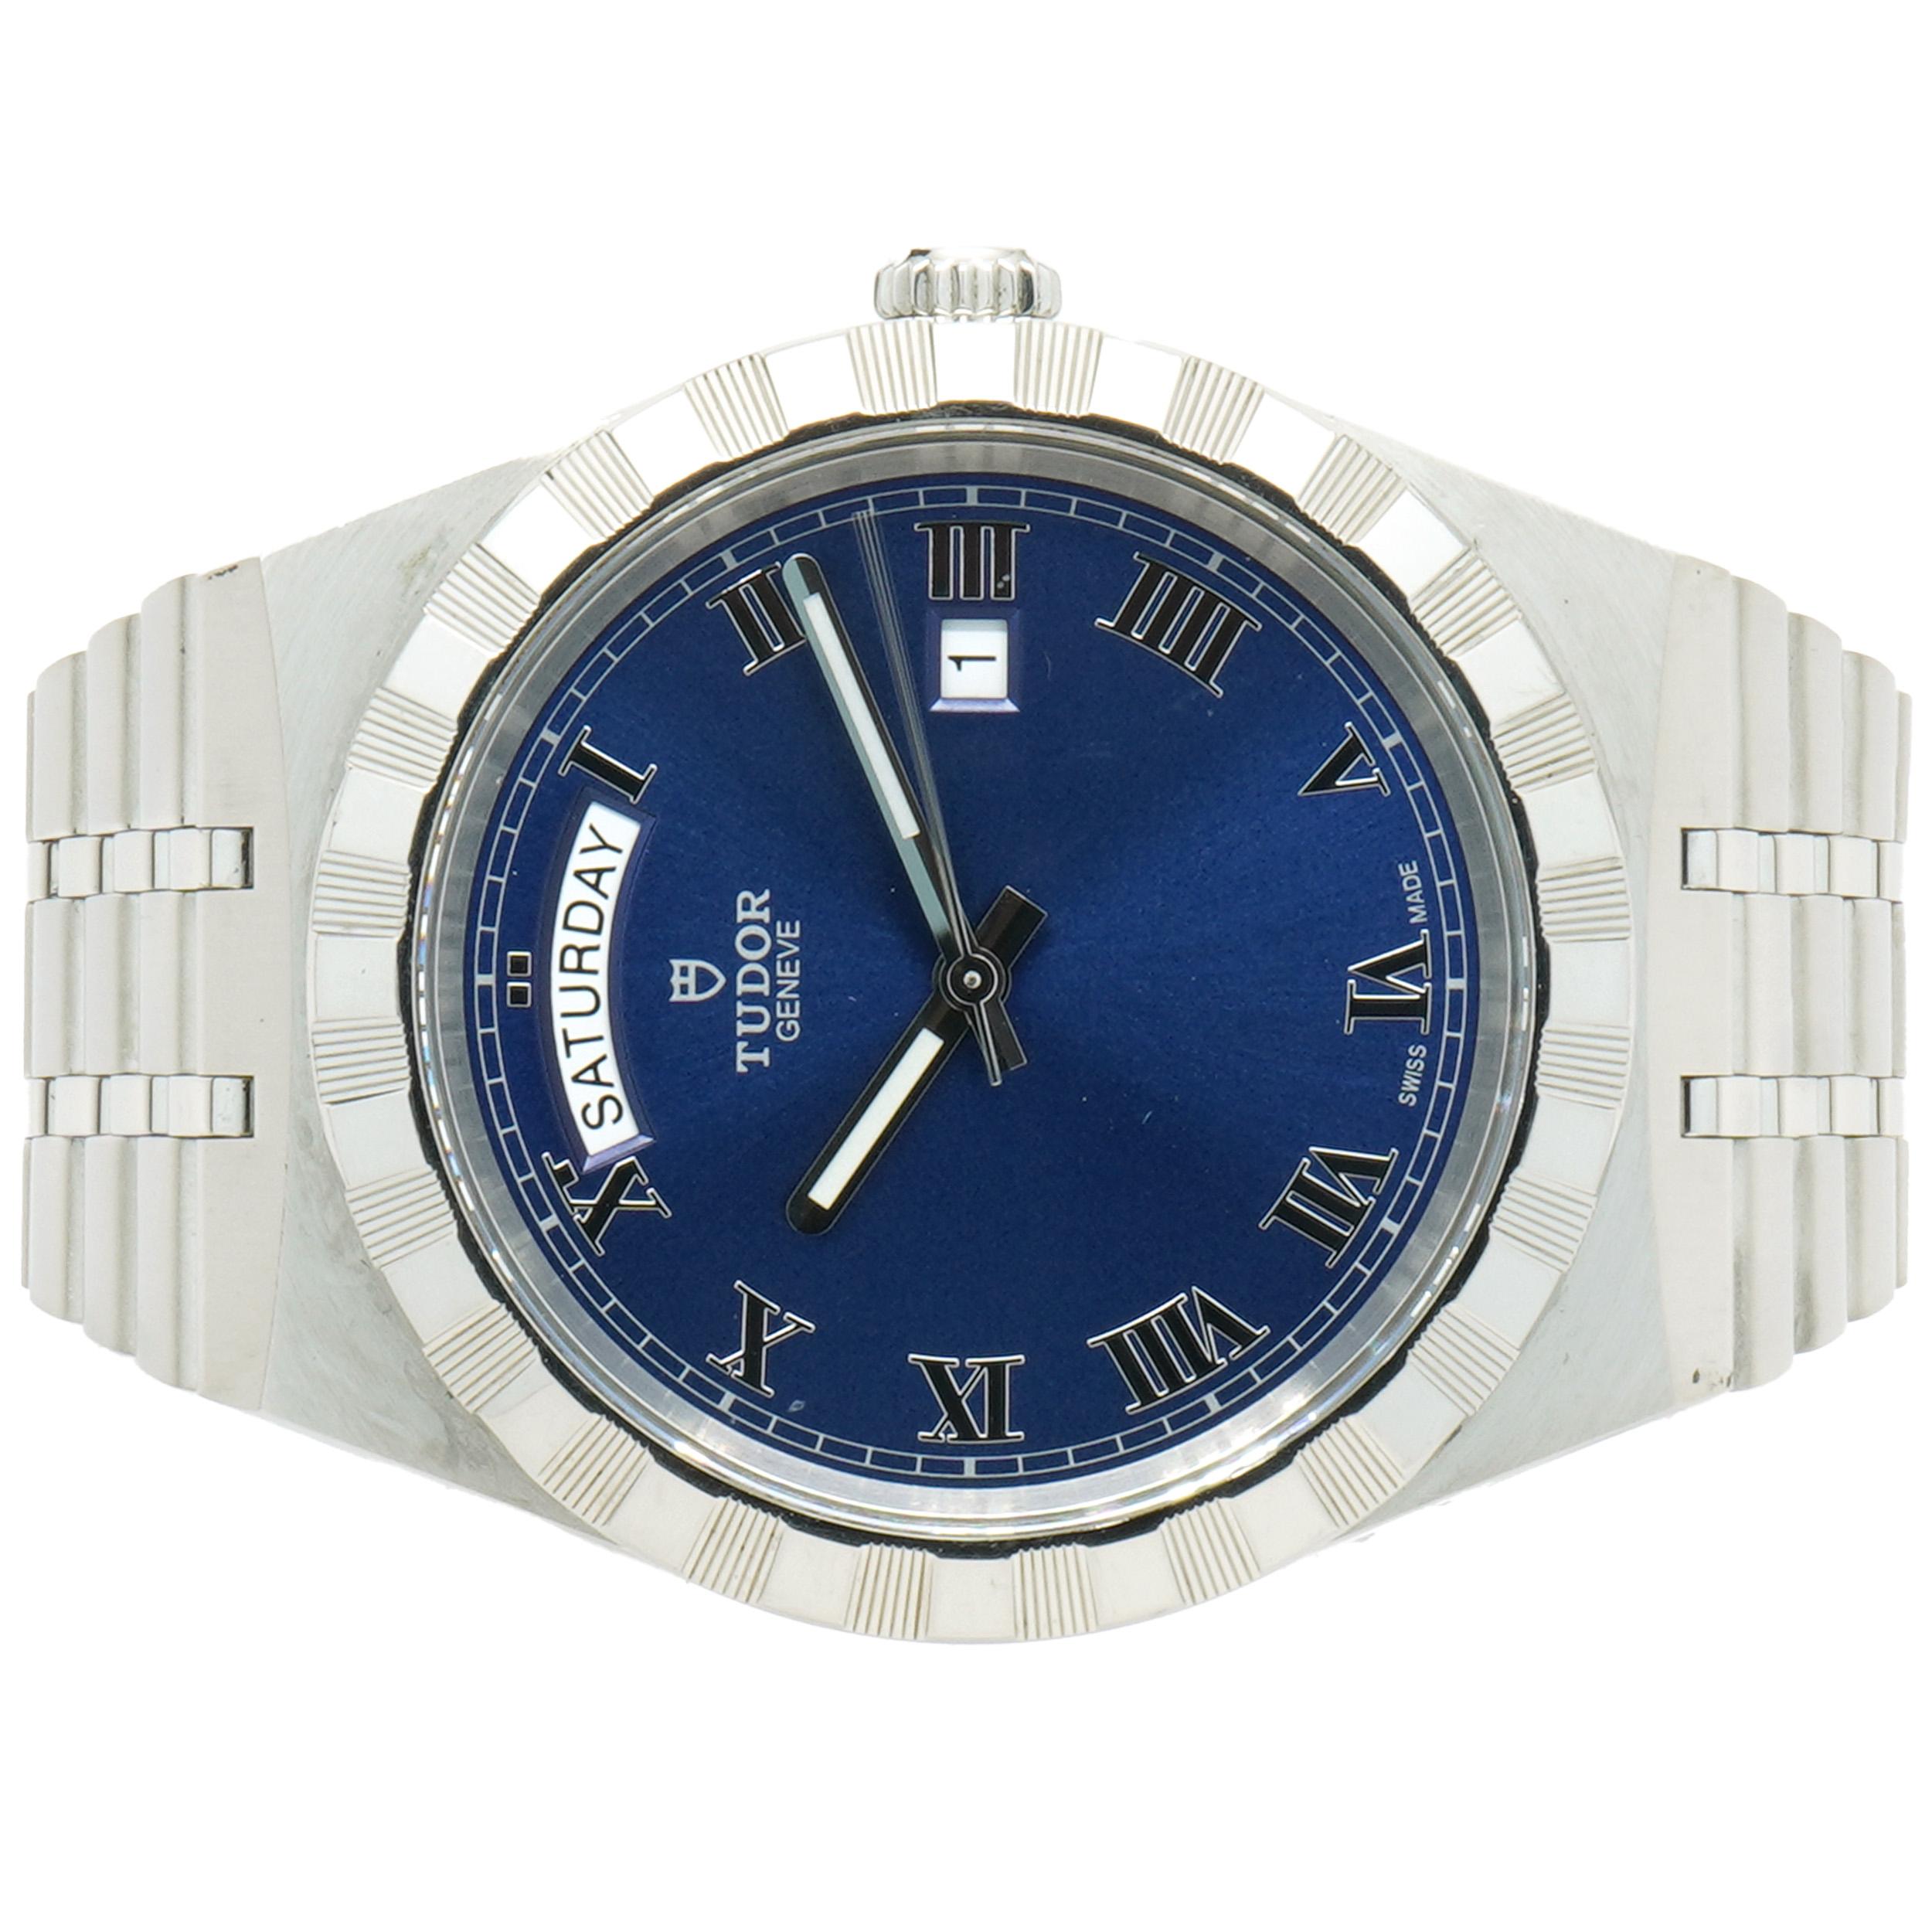 Movement: automatic
Function: hours, minutes, seconds, day, date
Case: 41mm stainless steel case, engine turned bezel
Dial: blue roman
Band: stainless steel bracelet, integrated clasp
Serial #: 2D01XXX
Reference #: 28600

Complete with original box